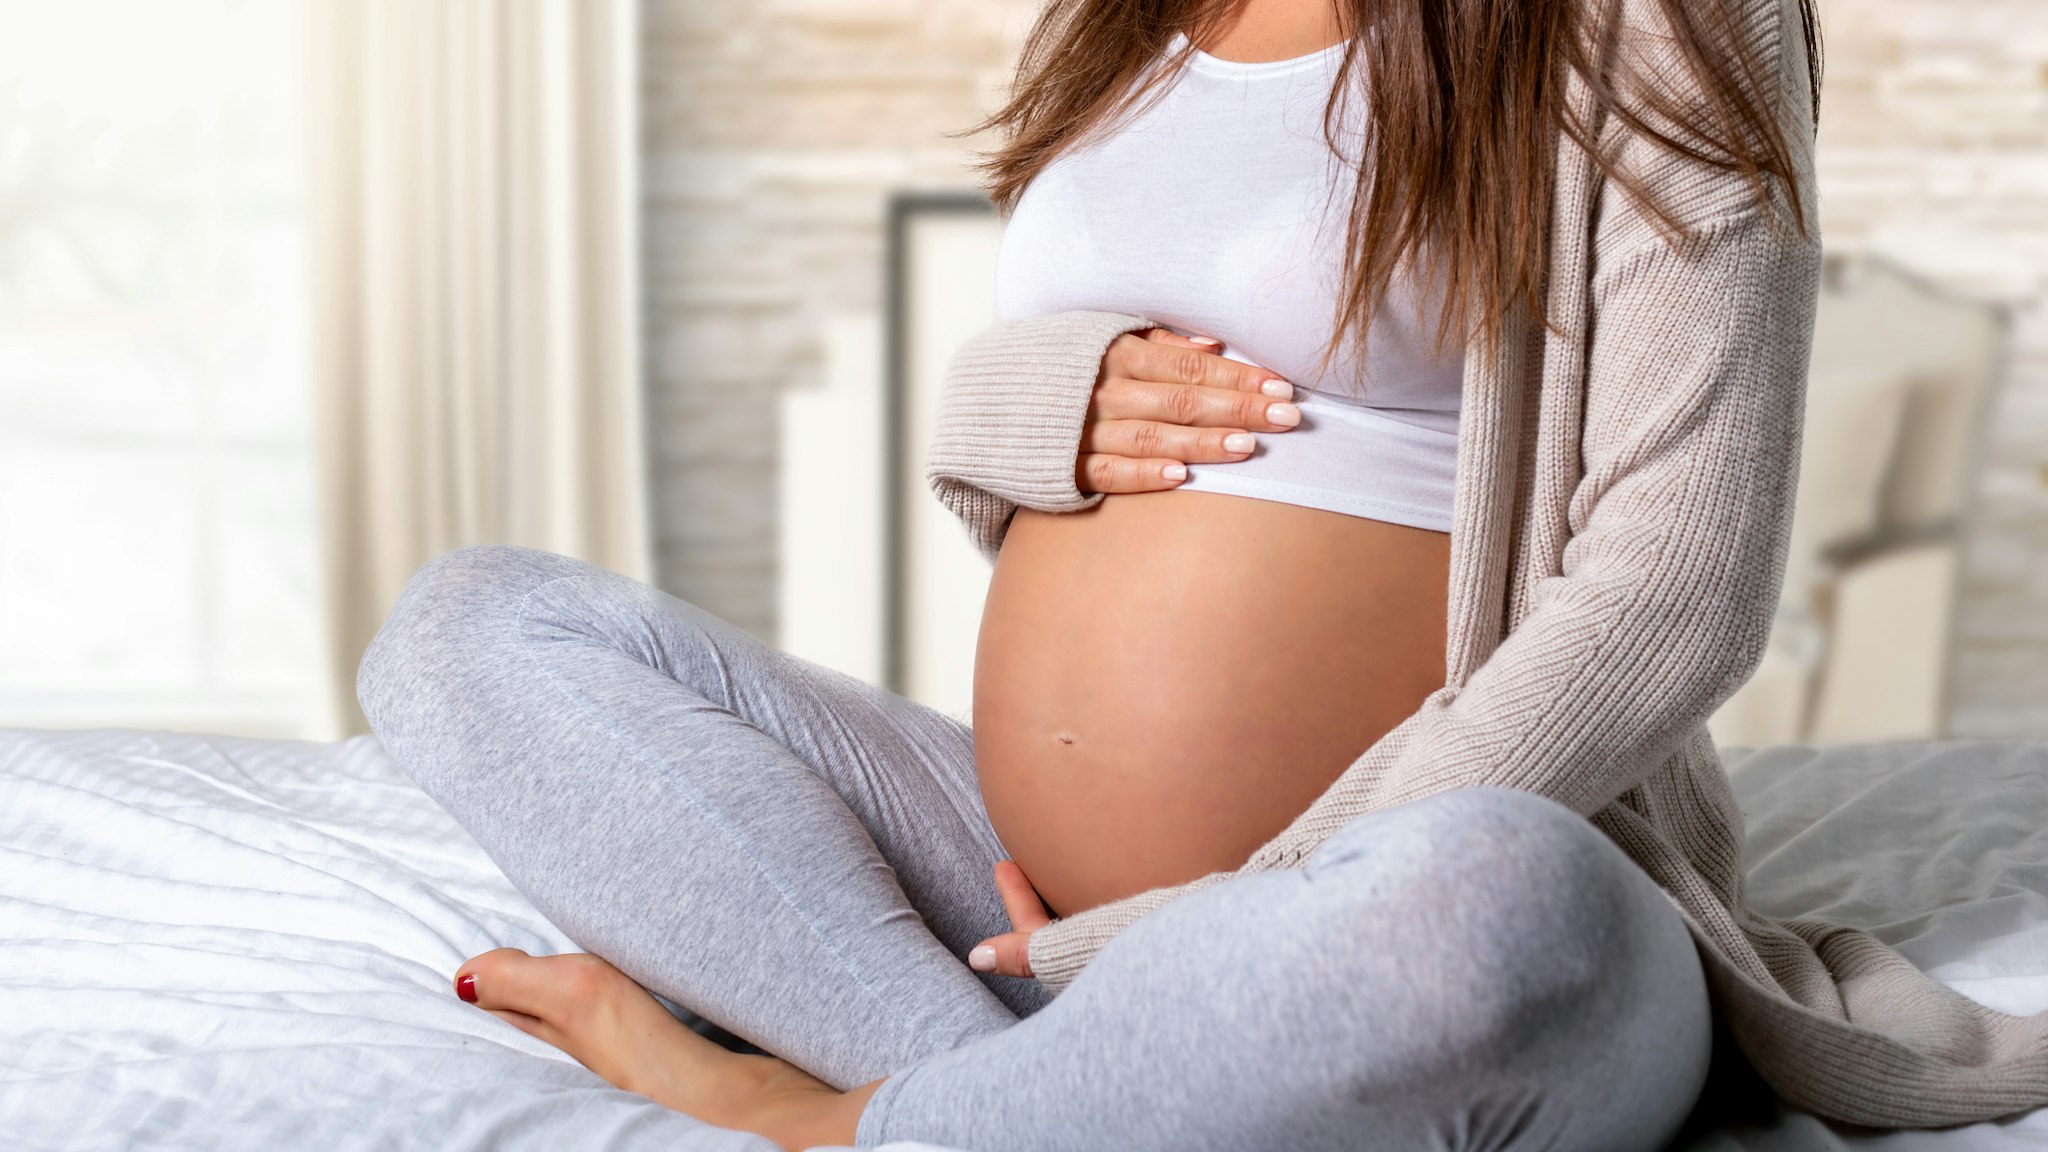 Low Section Of Pregnant Woman Touching Belly While Sitting On Bed - stock photo